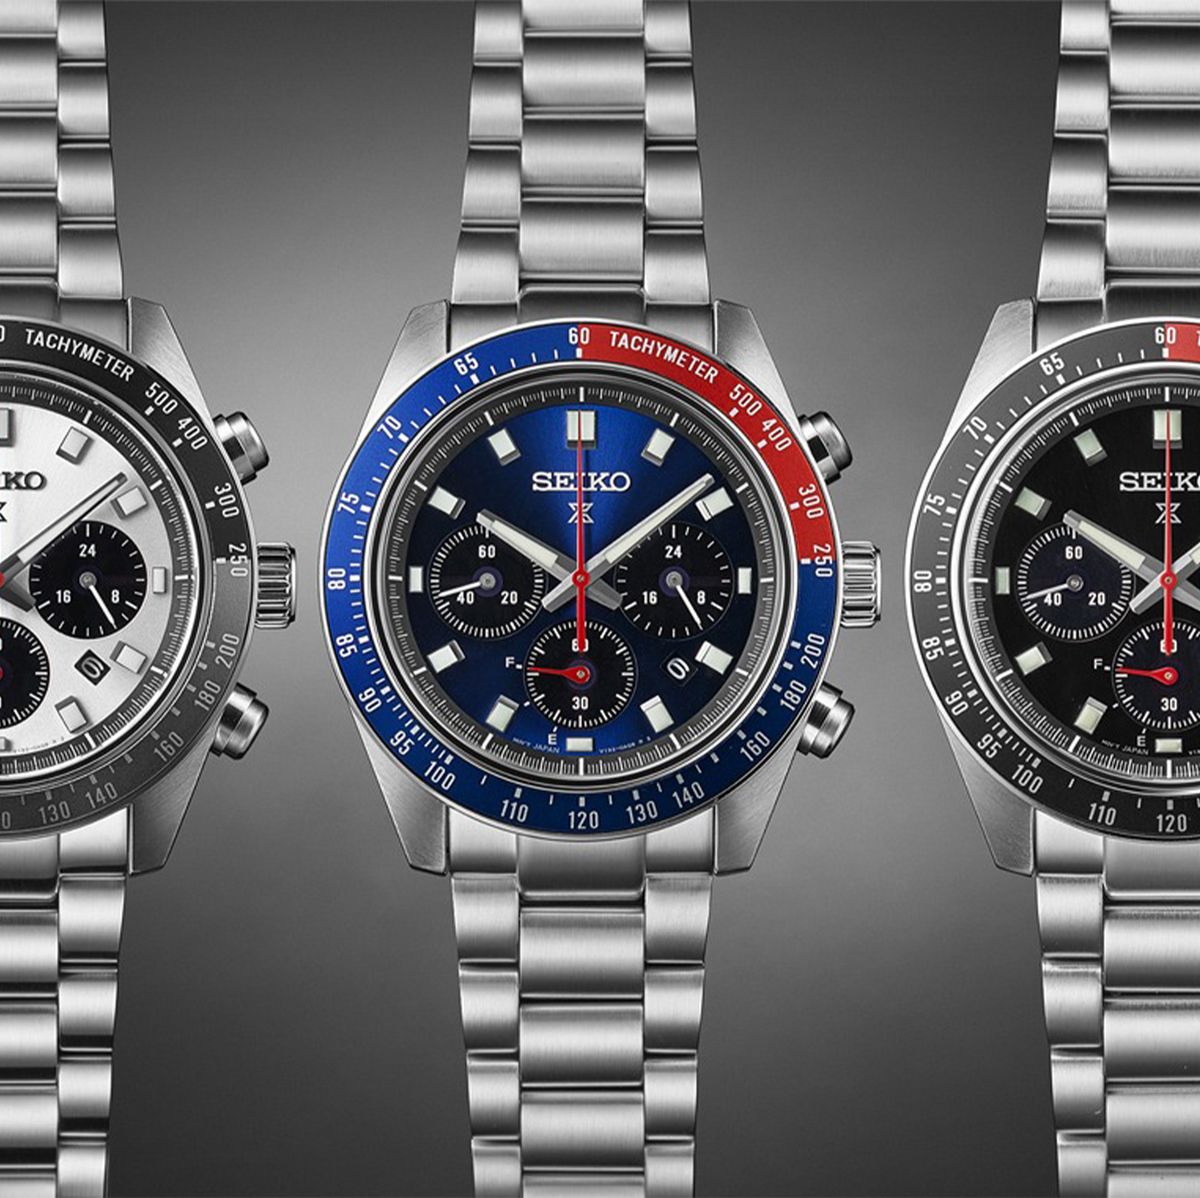 Seiko's New Speedtimer Chronographs Are Sure to Excite Watch Fans